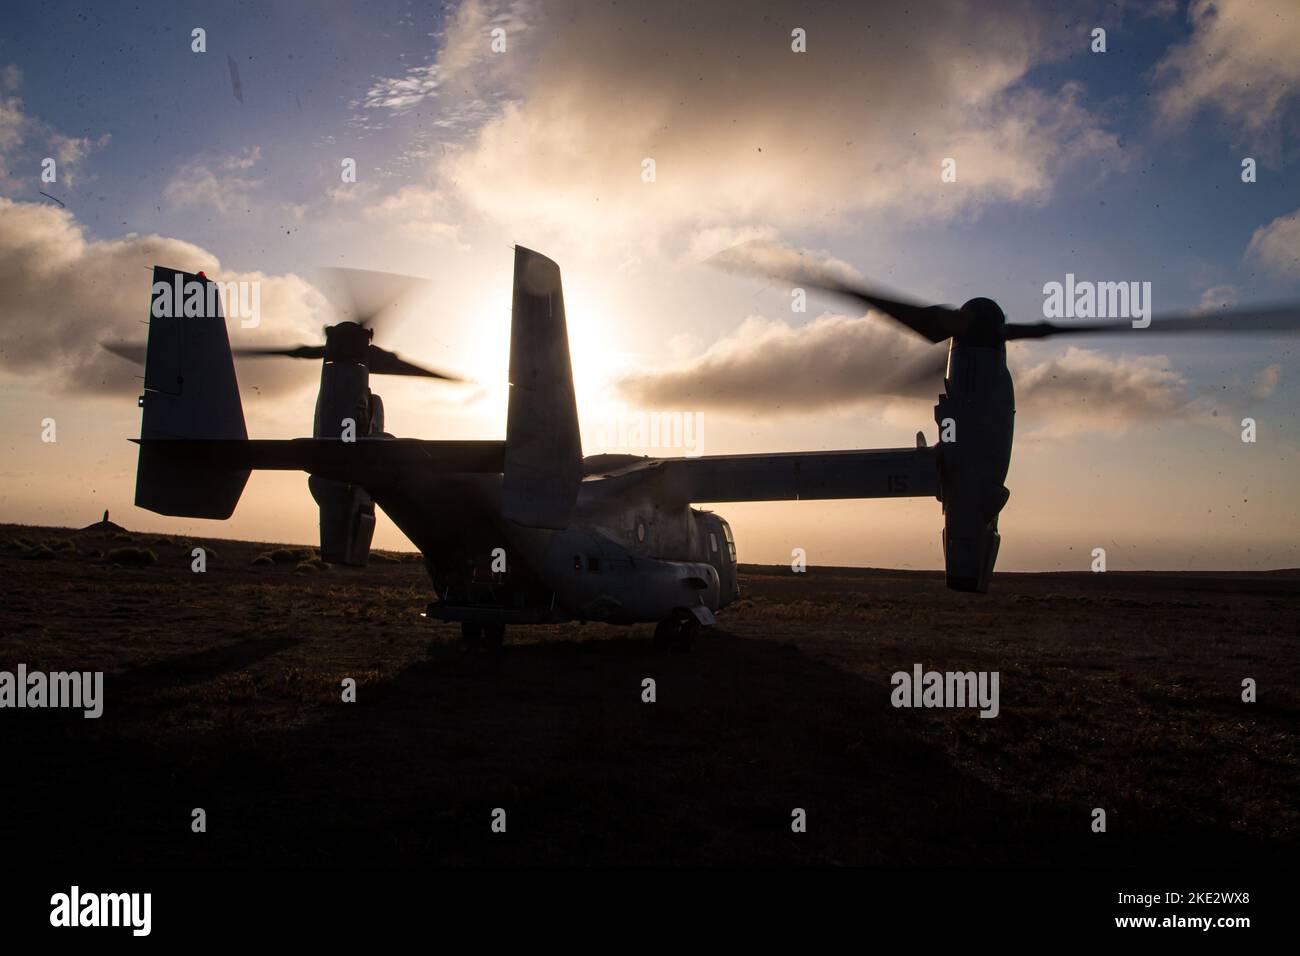 A U.S. Marine Corps MV-22B Osprey assigned to Marine Aviation Weapons and Tactics Squadron One (MAWTS-1) conducts live hoist exercises during Weapons and Tactics Instructor (WTI) course 1-23 at San Clemente Island, California, Oct. 28, 2022. WTI is a seven-week training event hosted by MAWTS-1, providing standardized advanced tactical training and certification of unit instructor qualifications to support Marine aviation training and readiness, and assists in developing and employing aviation weapons and tactics. (U.S. Marine Corps photo by Cpl. Celestino HernandezSilvar) Stock Photo